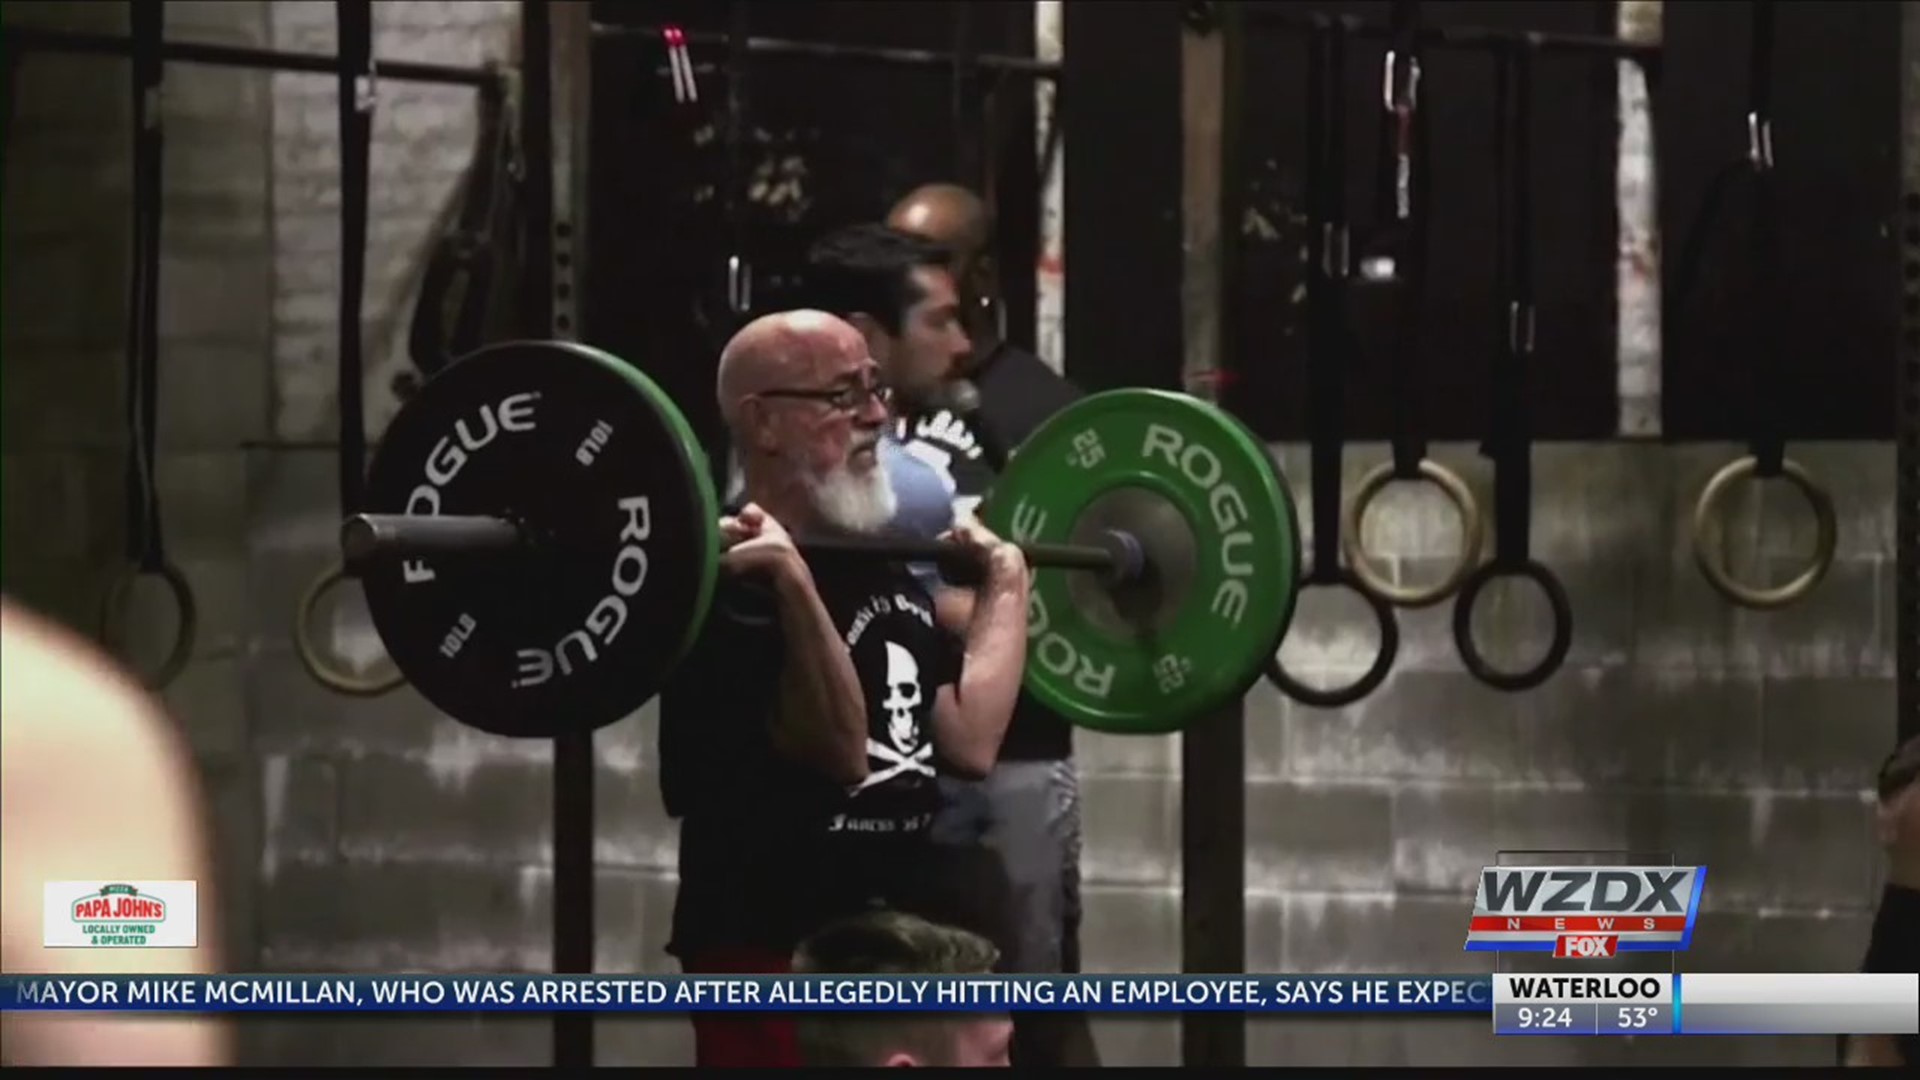 They call him "the grandfather of CrossFit." Jacinto Bonilla is 80, and he says age doesn't matter when it comes to fitness.